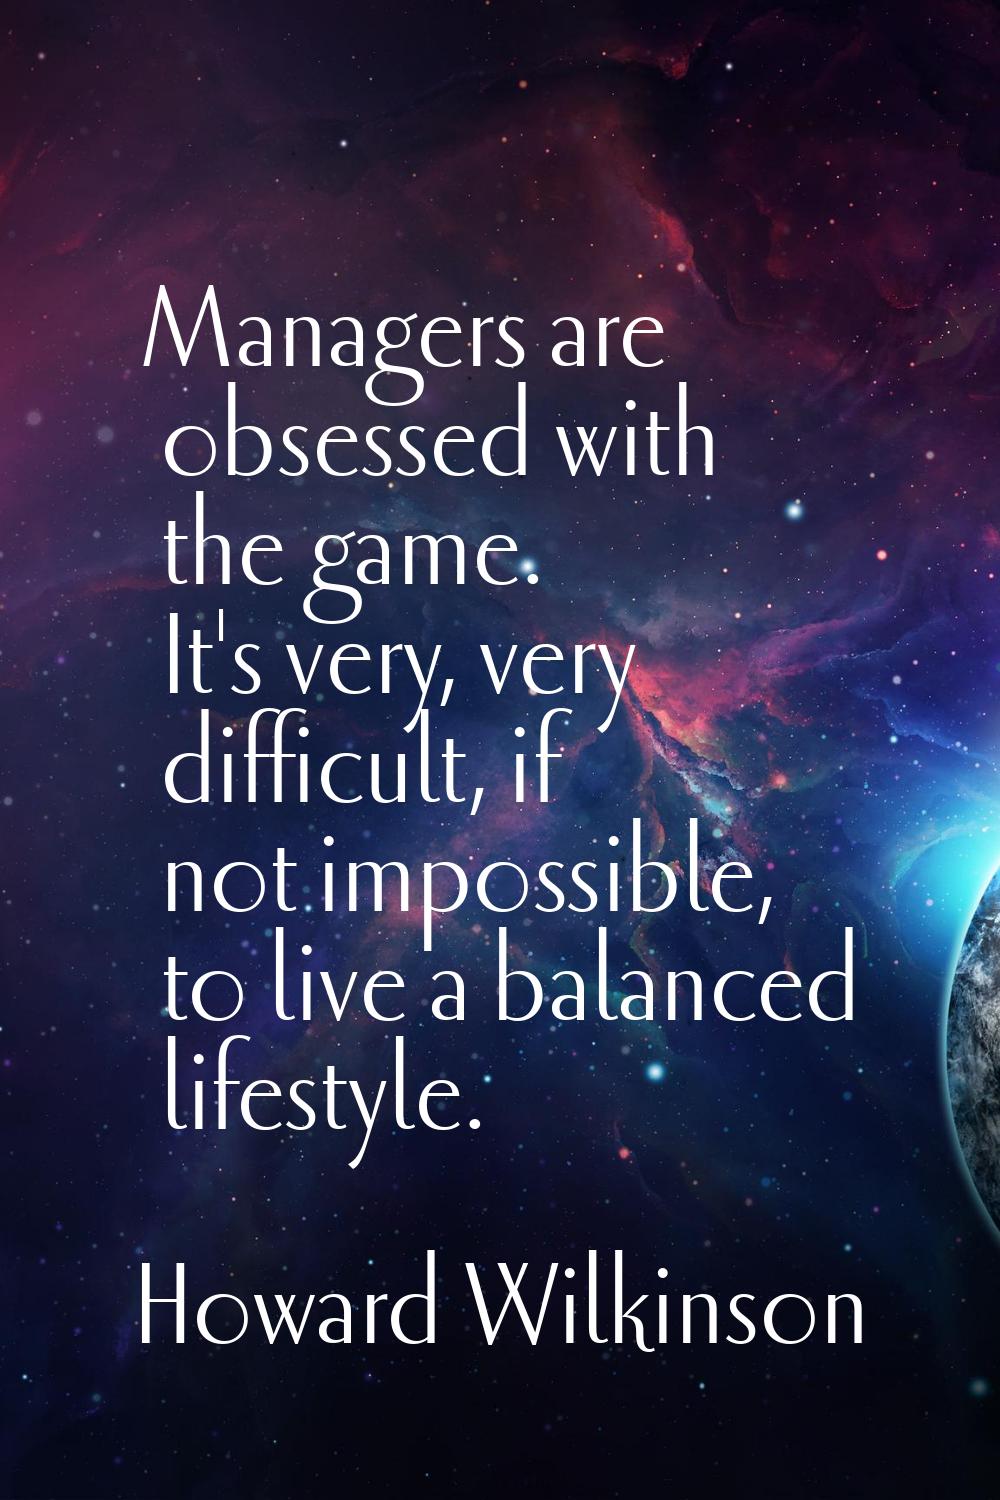 Managers are obsessed with the game. It's very, very difficult, if not impossible, to live a balanc